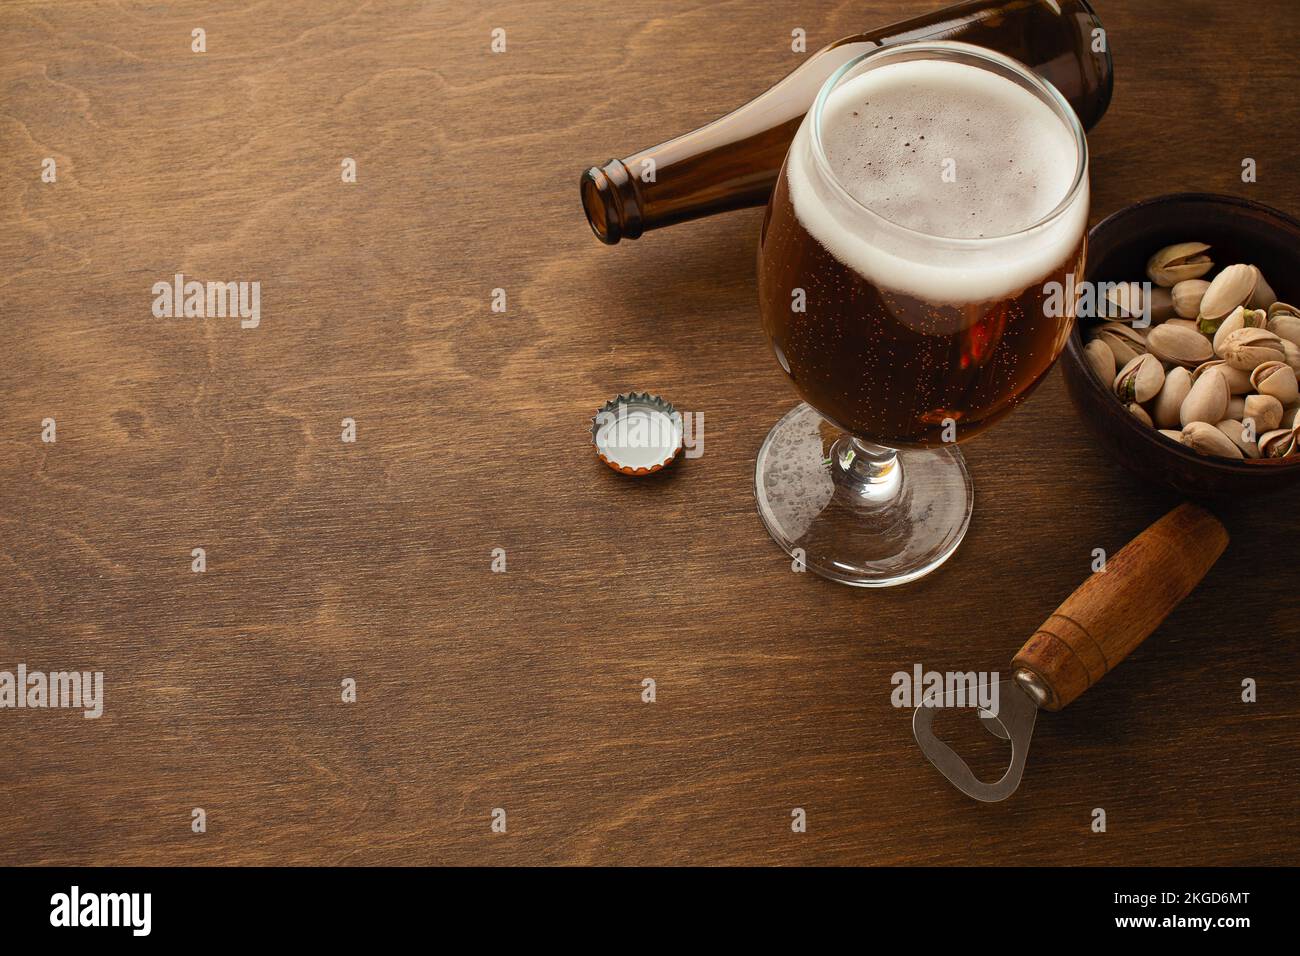 A bottle of beer on a plate with salted ookies pretzels, pistachio nuts and chips on a black scratched chalk board. Top view. High quality photo Stock Photo